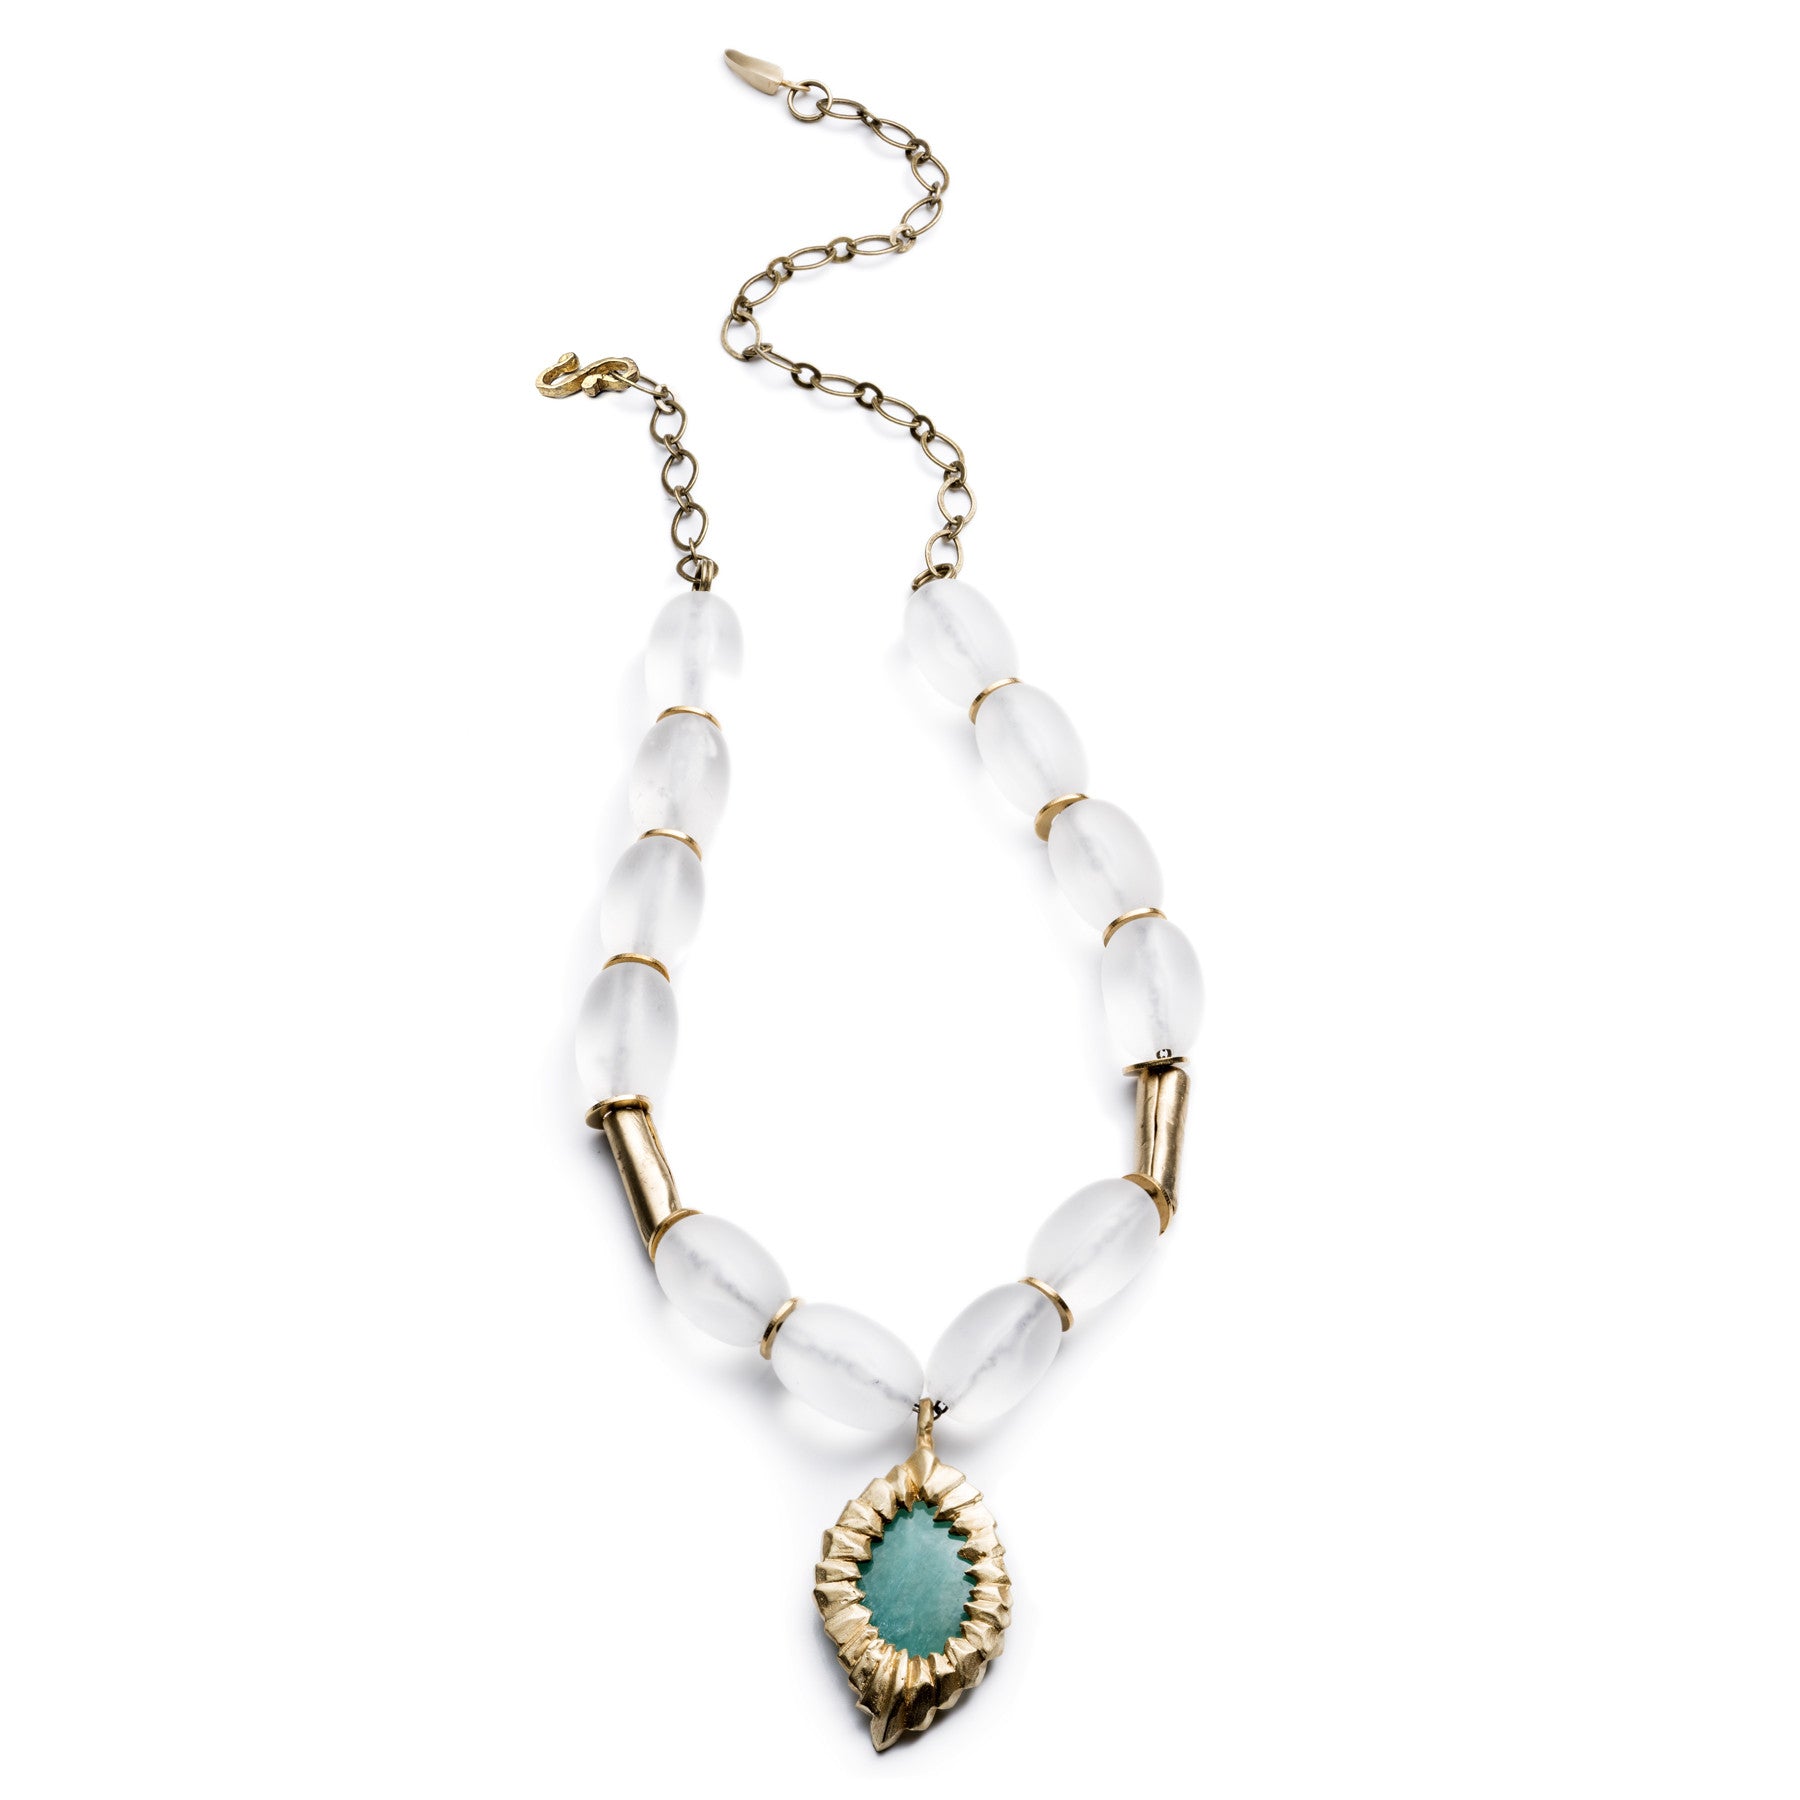 DECO CHRYSOPRASE AND LUCITE NECKLACE